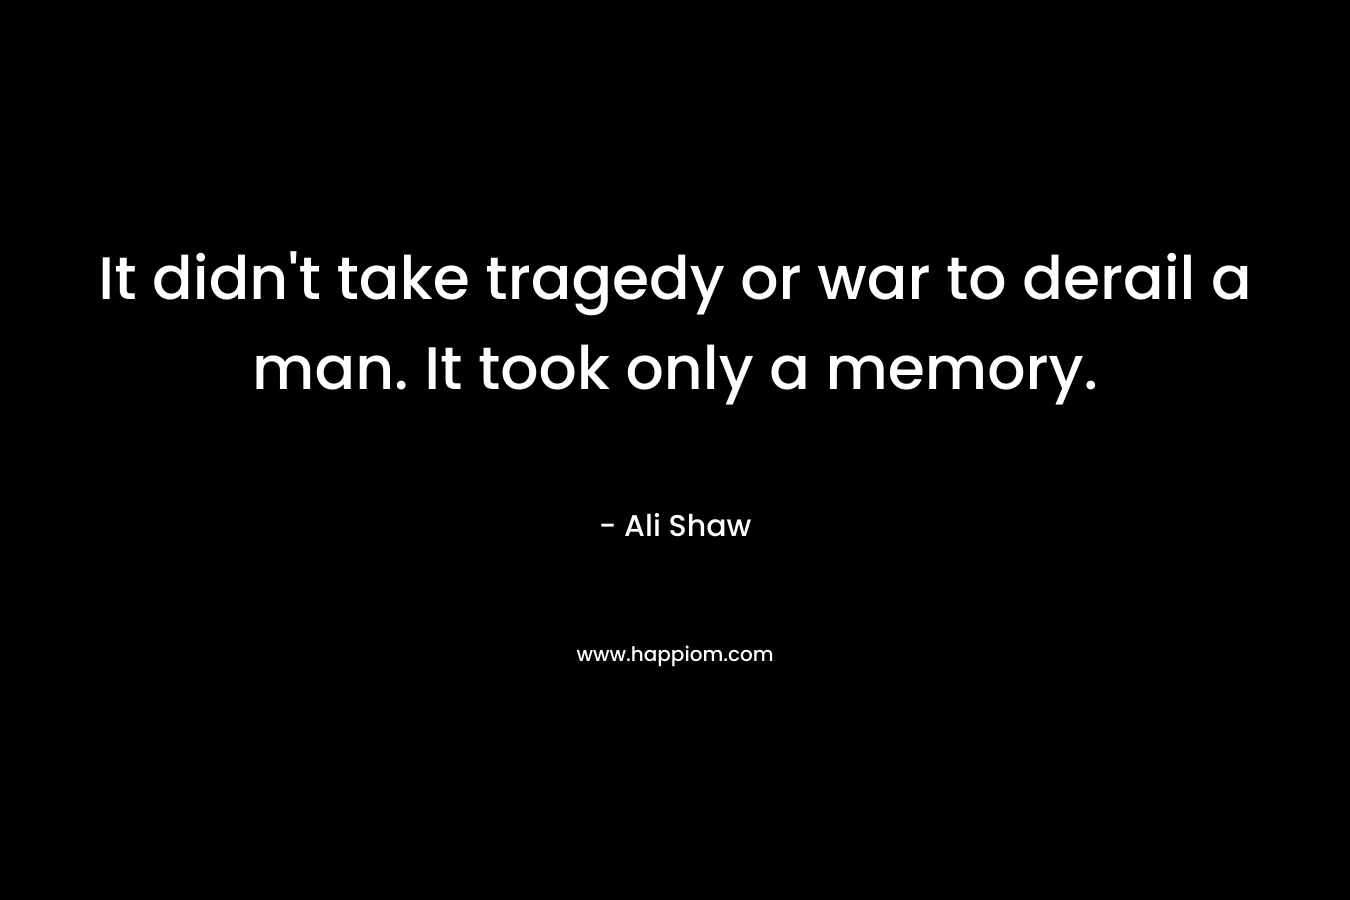 It didn't take tragedy or war to derail a man. It took only a memory.